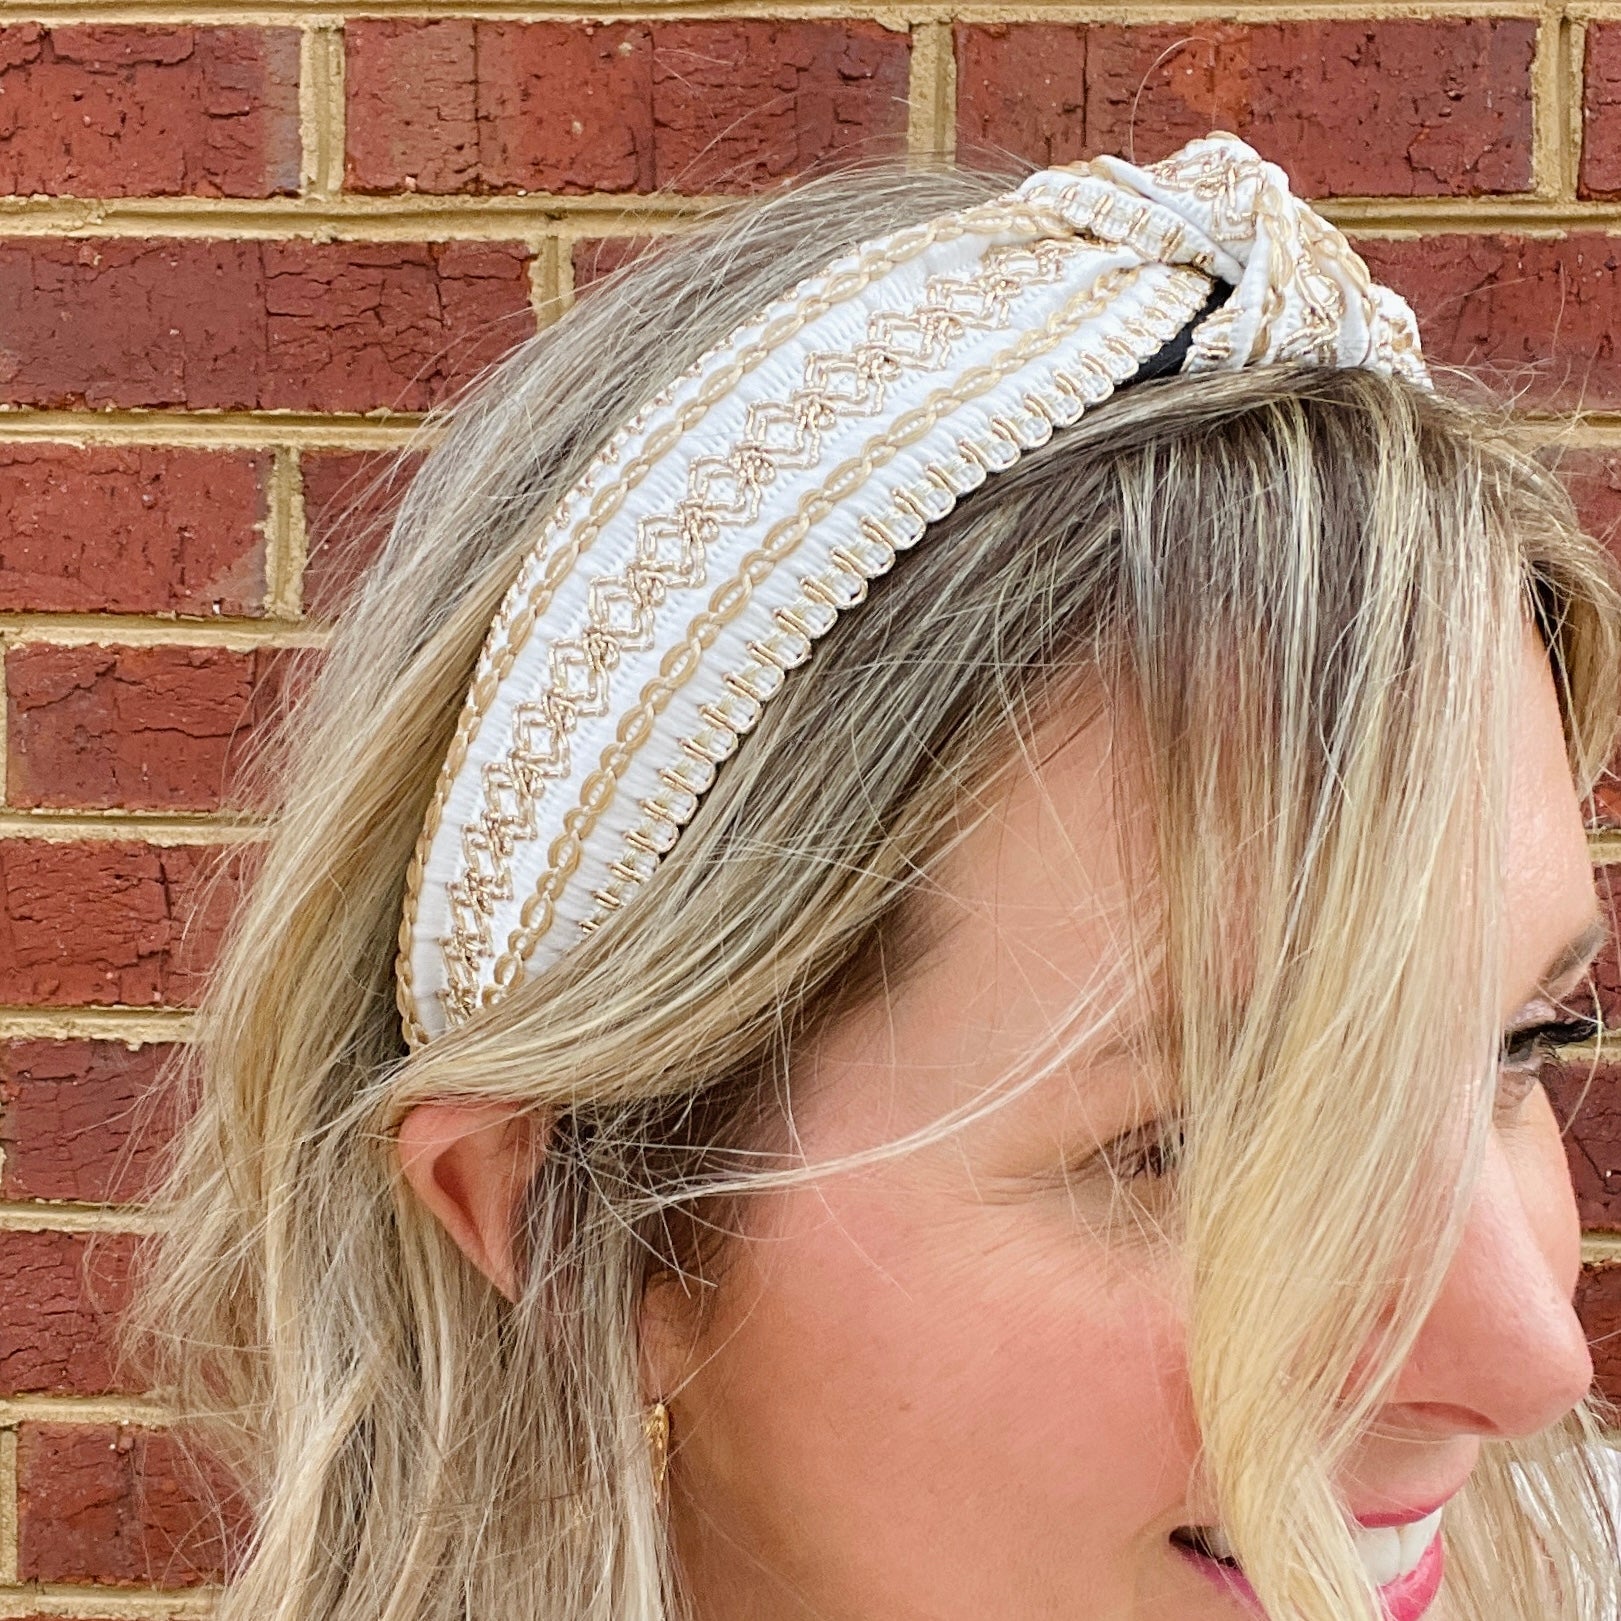 White with Gold Delicately Stitched Knot Headband - Gray Bird Label